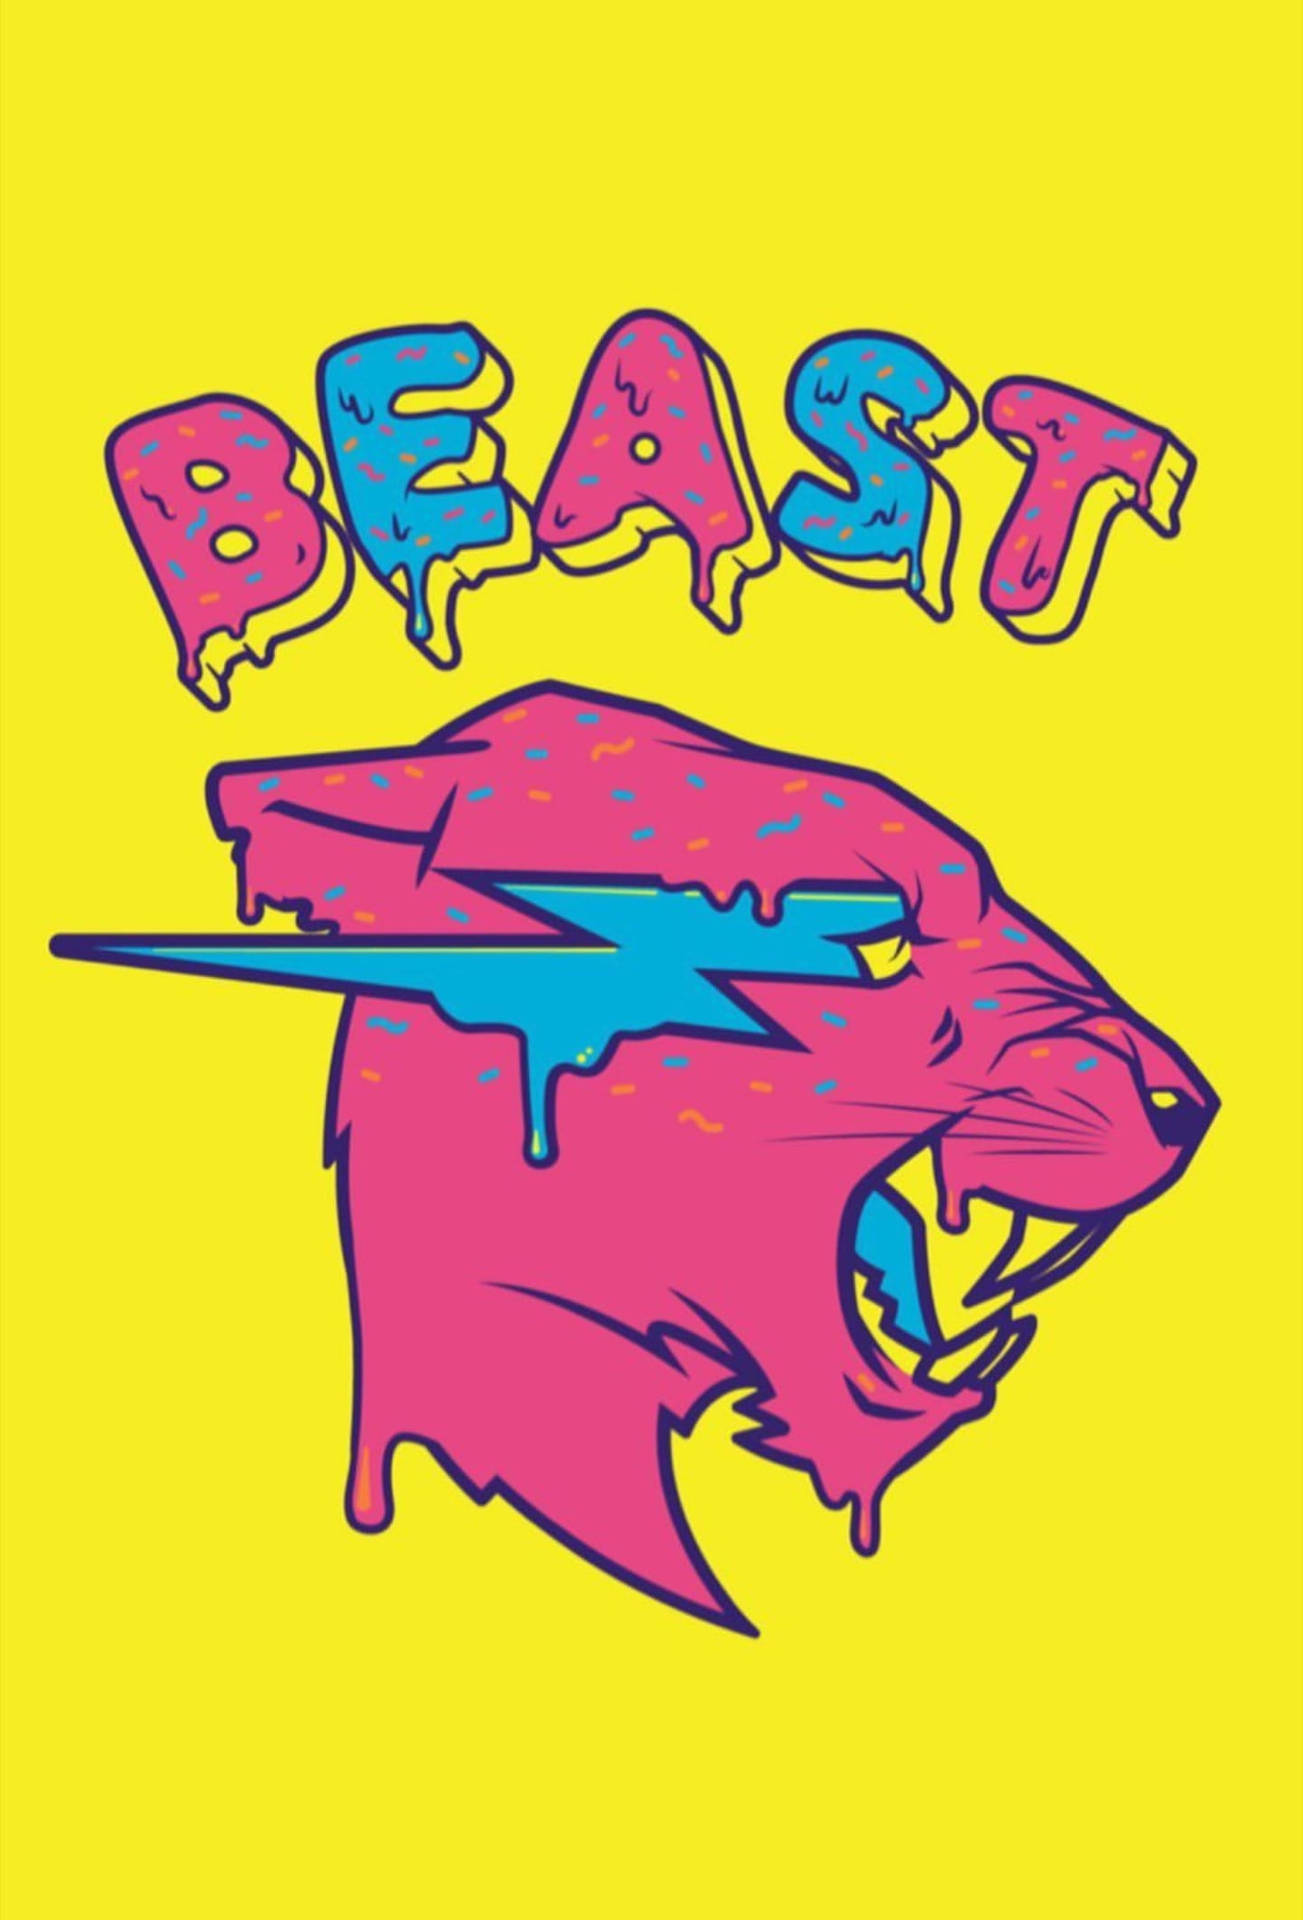 Exceptional Mr Beast Logo in Bright Yellow Wallpaper